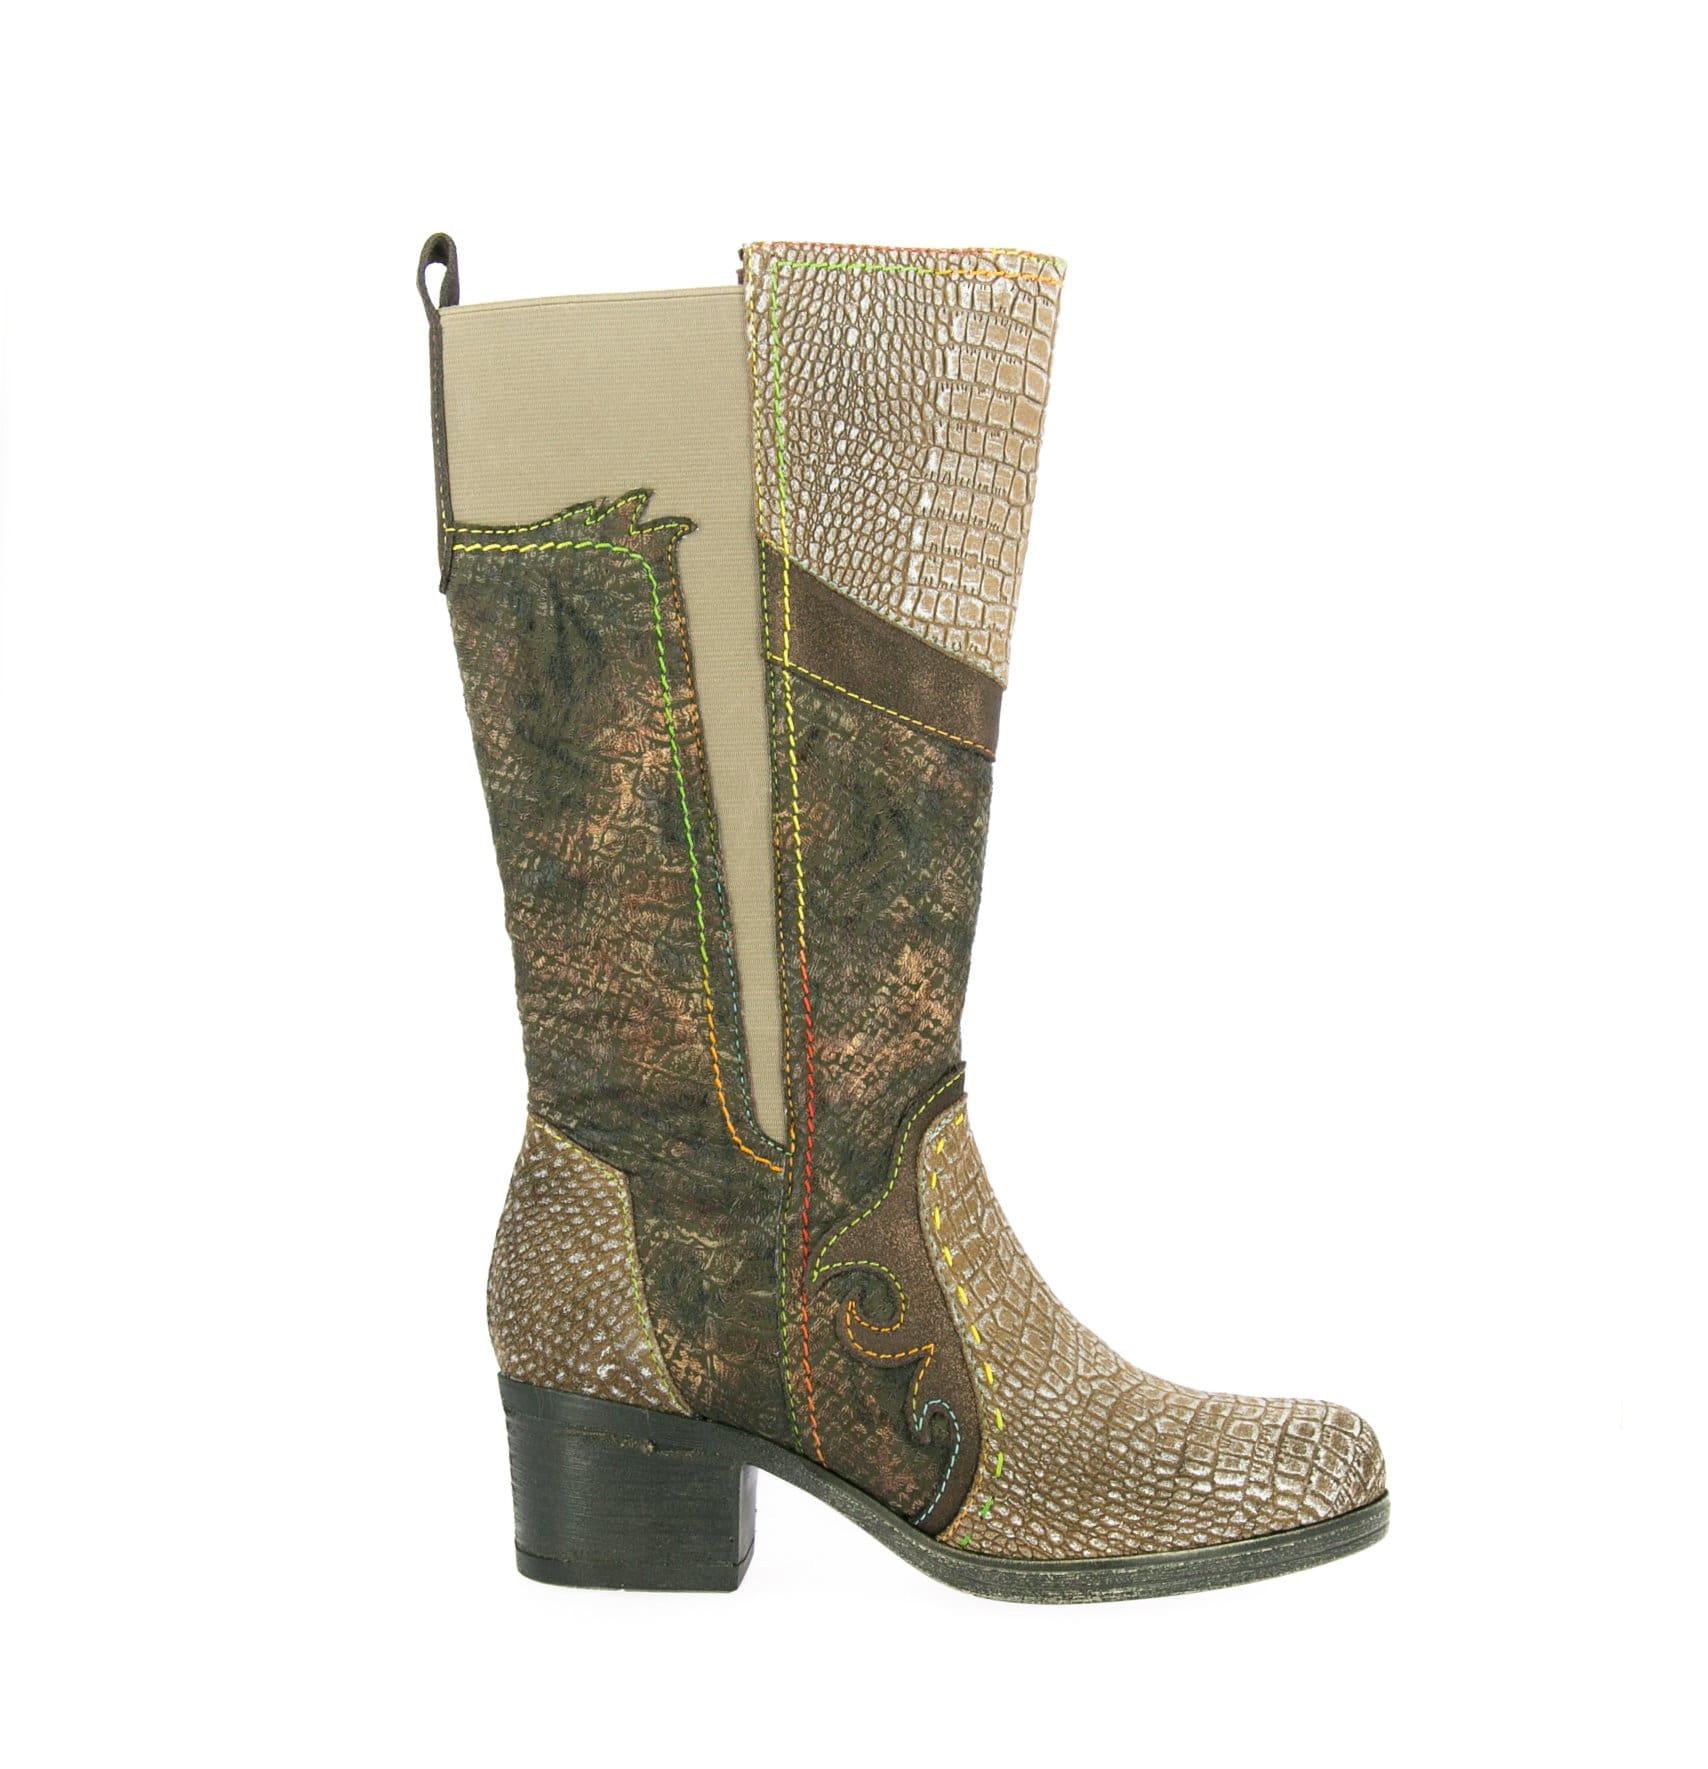 Buty CINDY 06 - 35 / Taupe - Boot